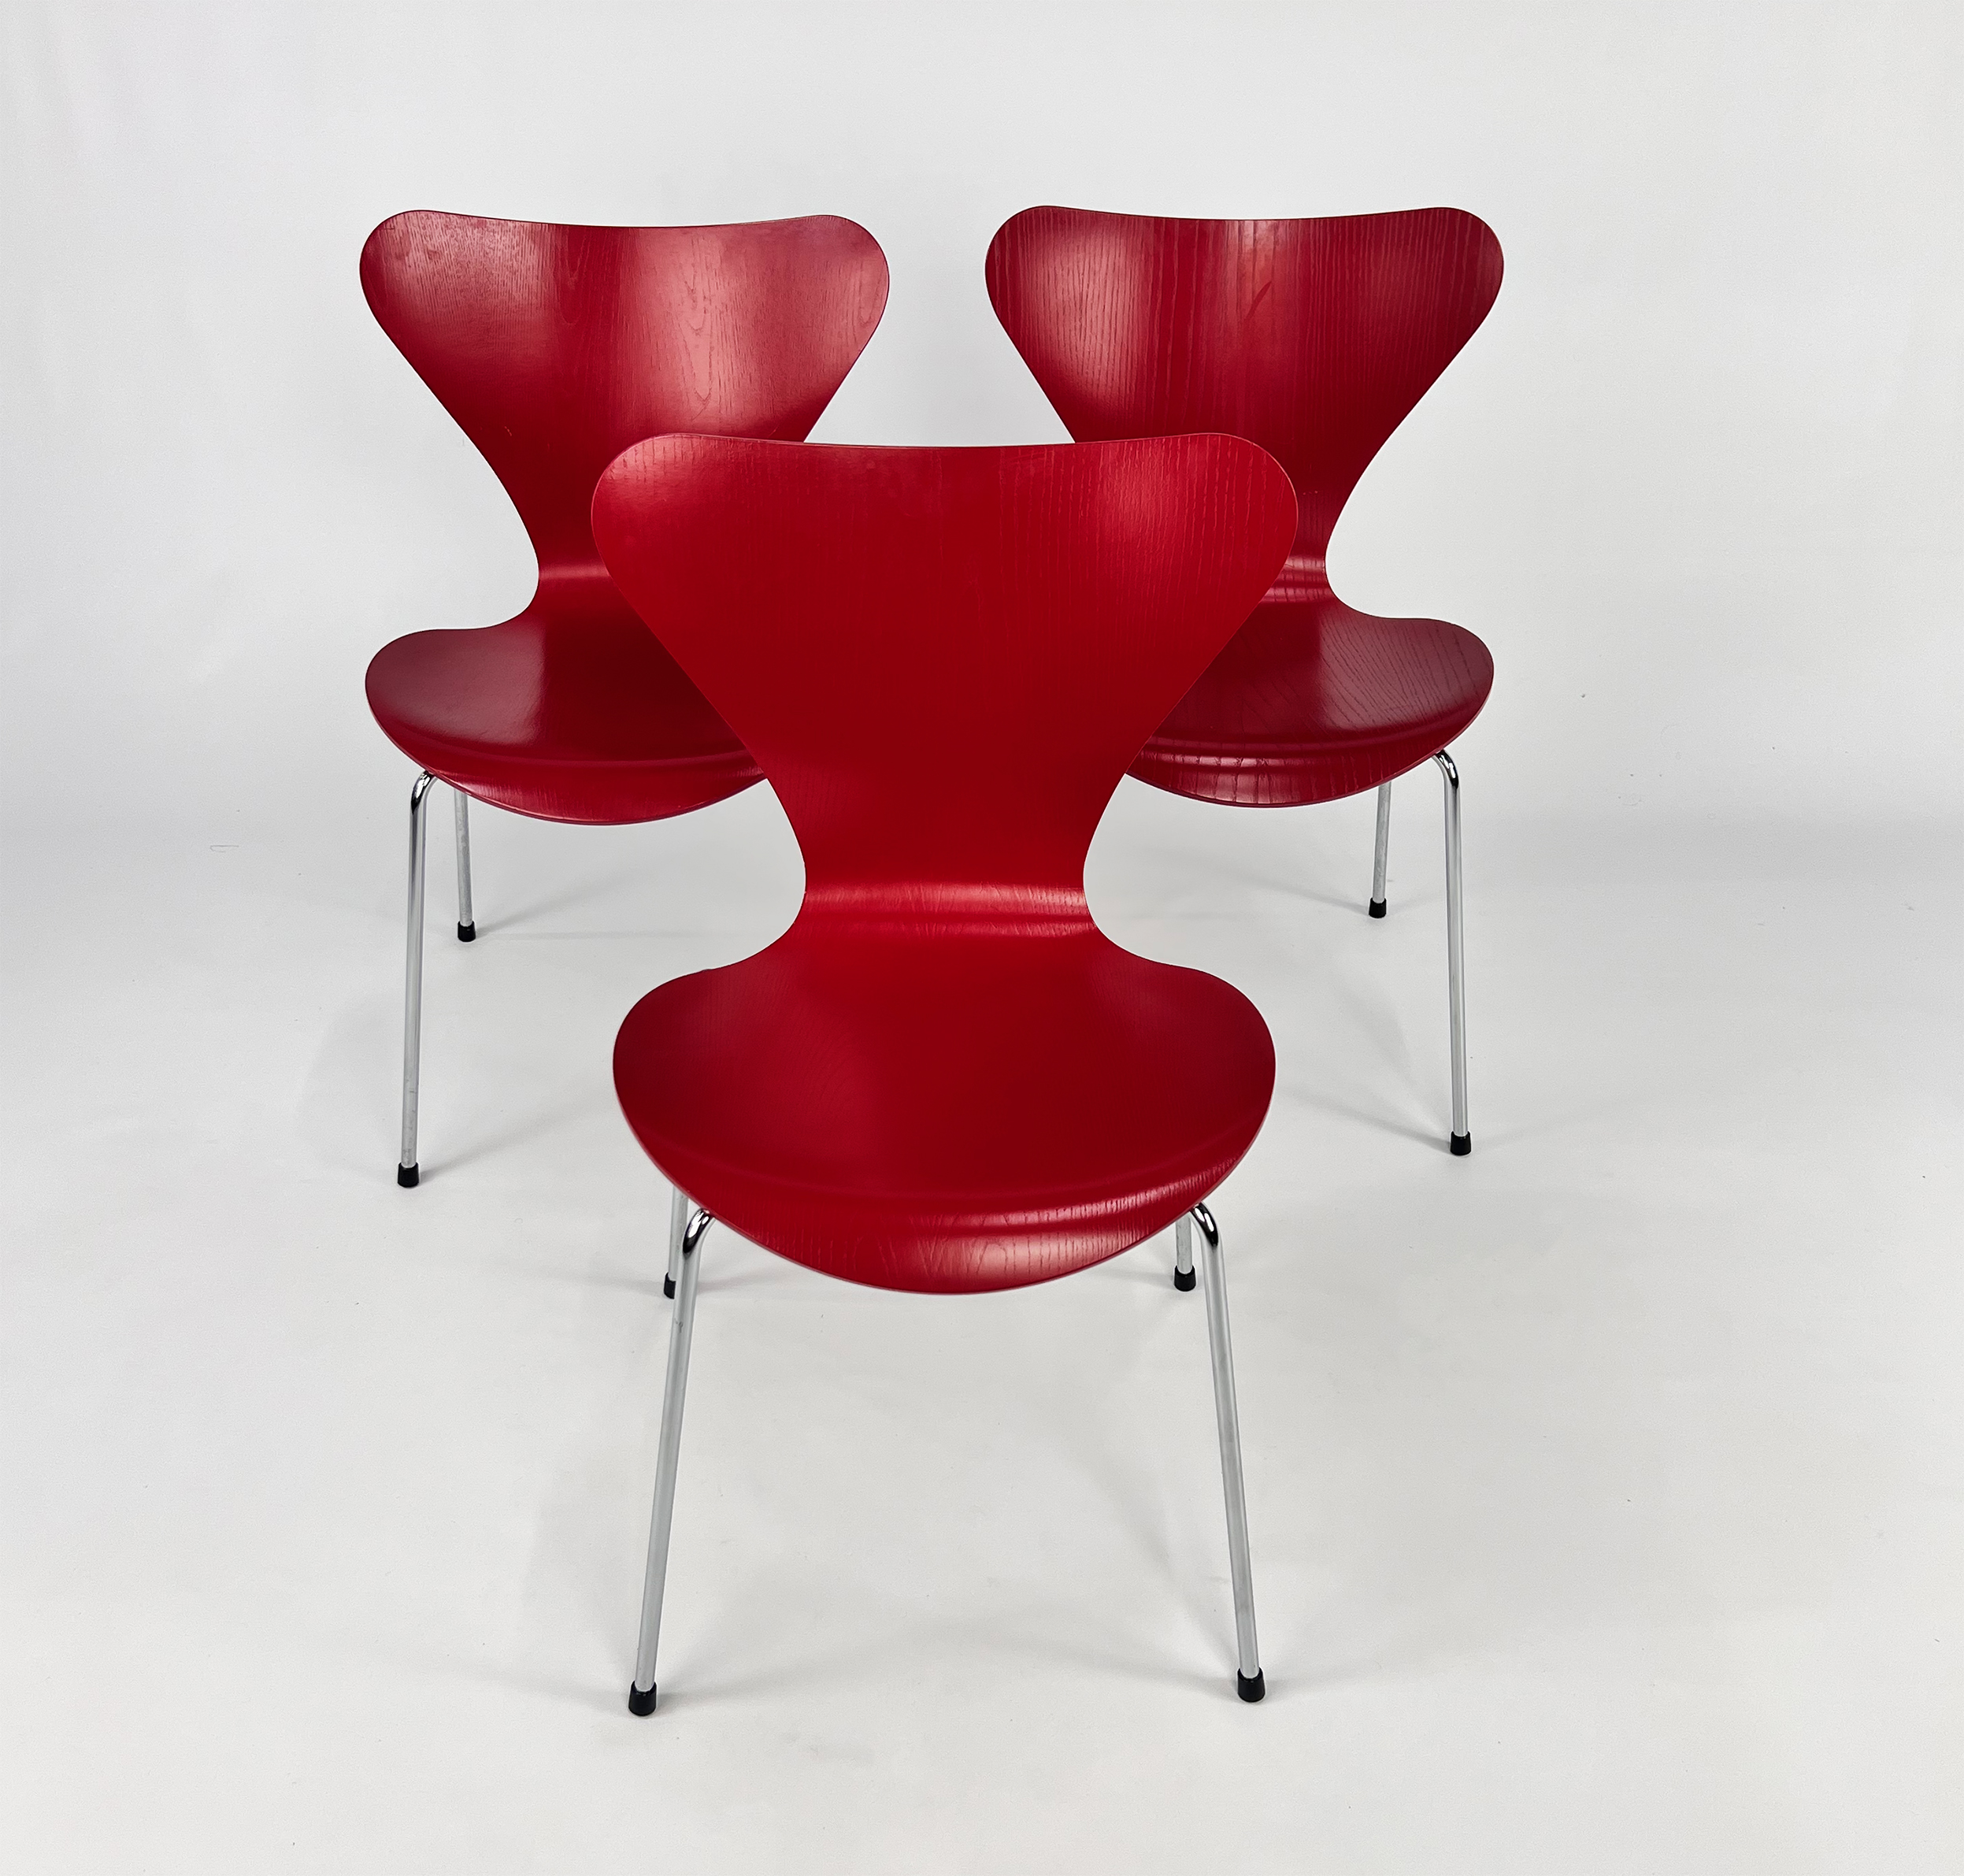 Set of 3 Butterfly Chairs by Arne Jacobsen for Fritz Hansen, 2006